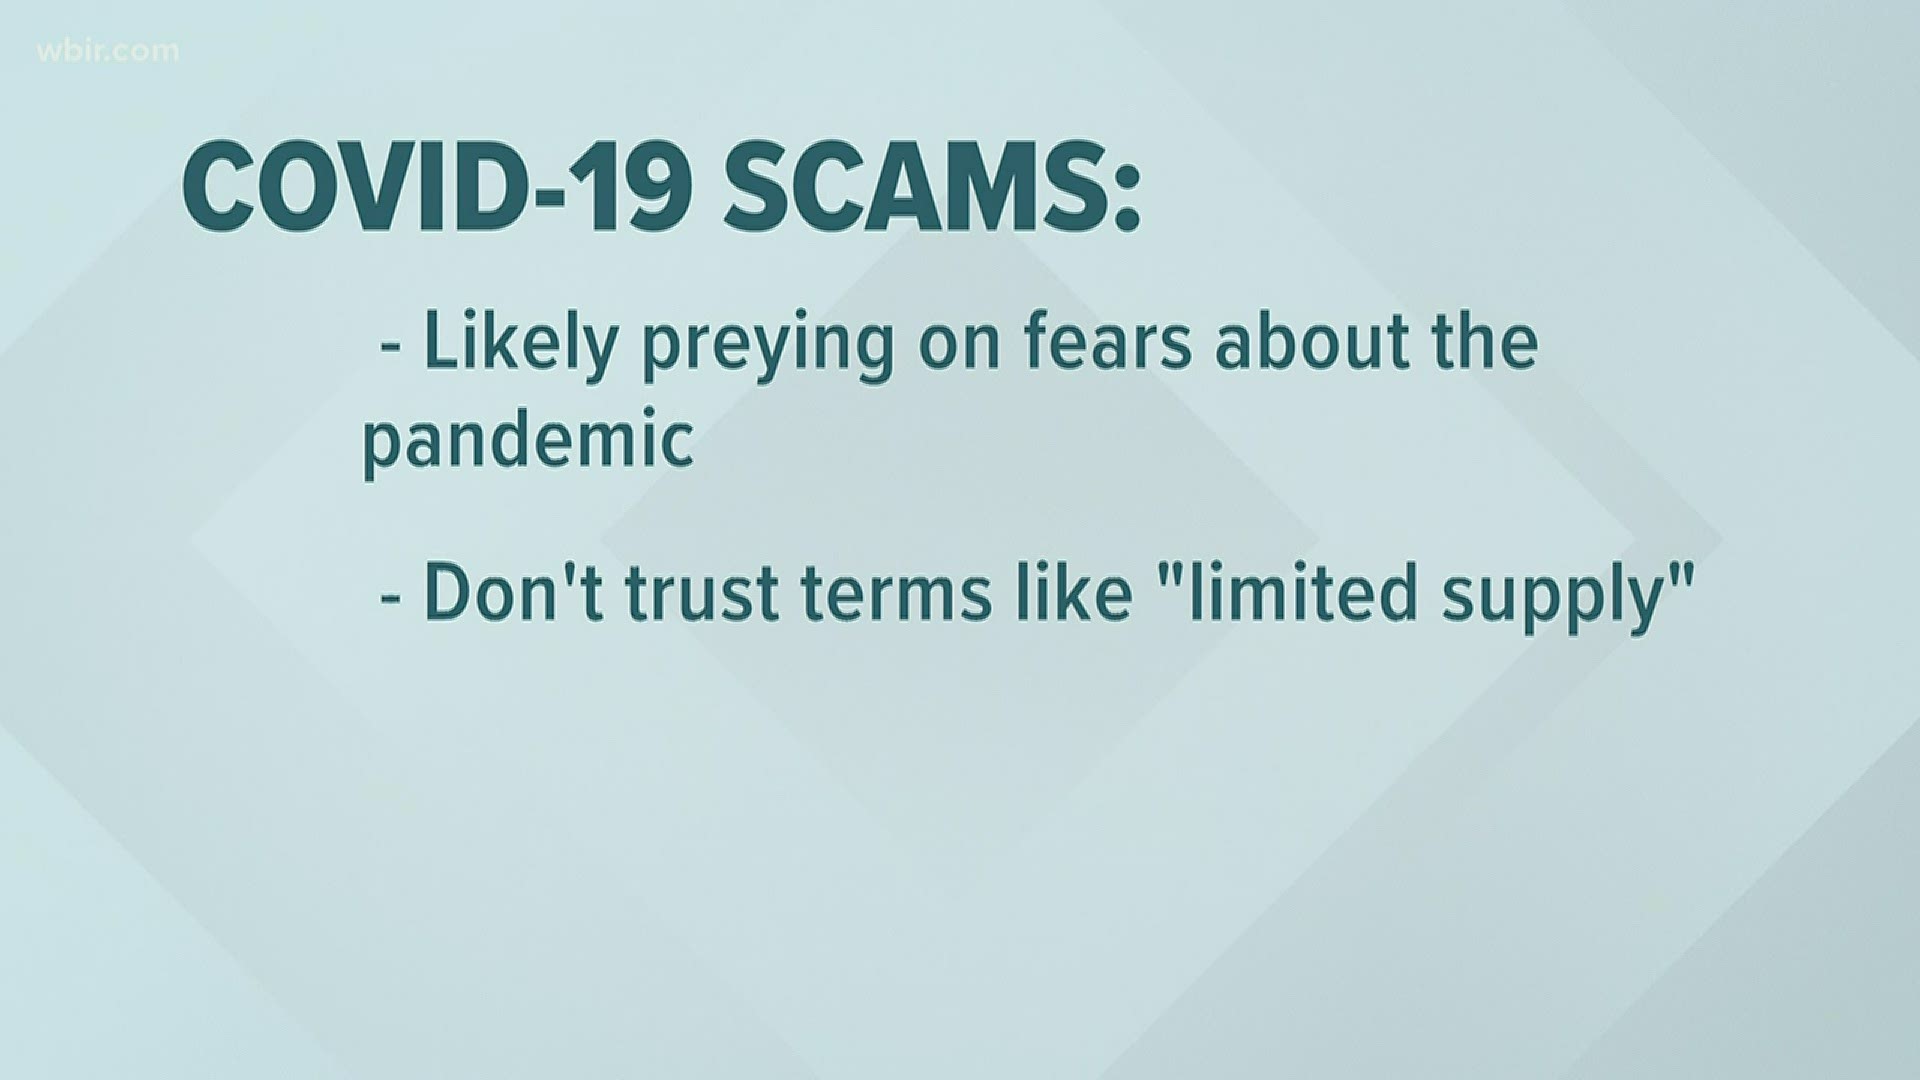 From stimulus money to personal protective equipment, scammers are using the pandemic to target your money.